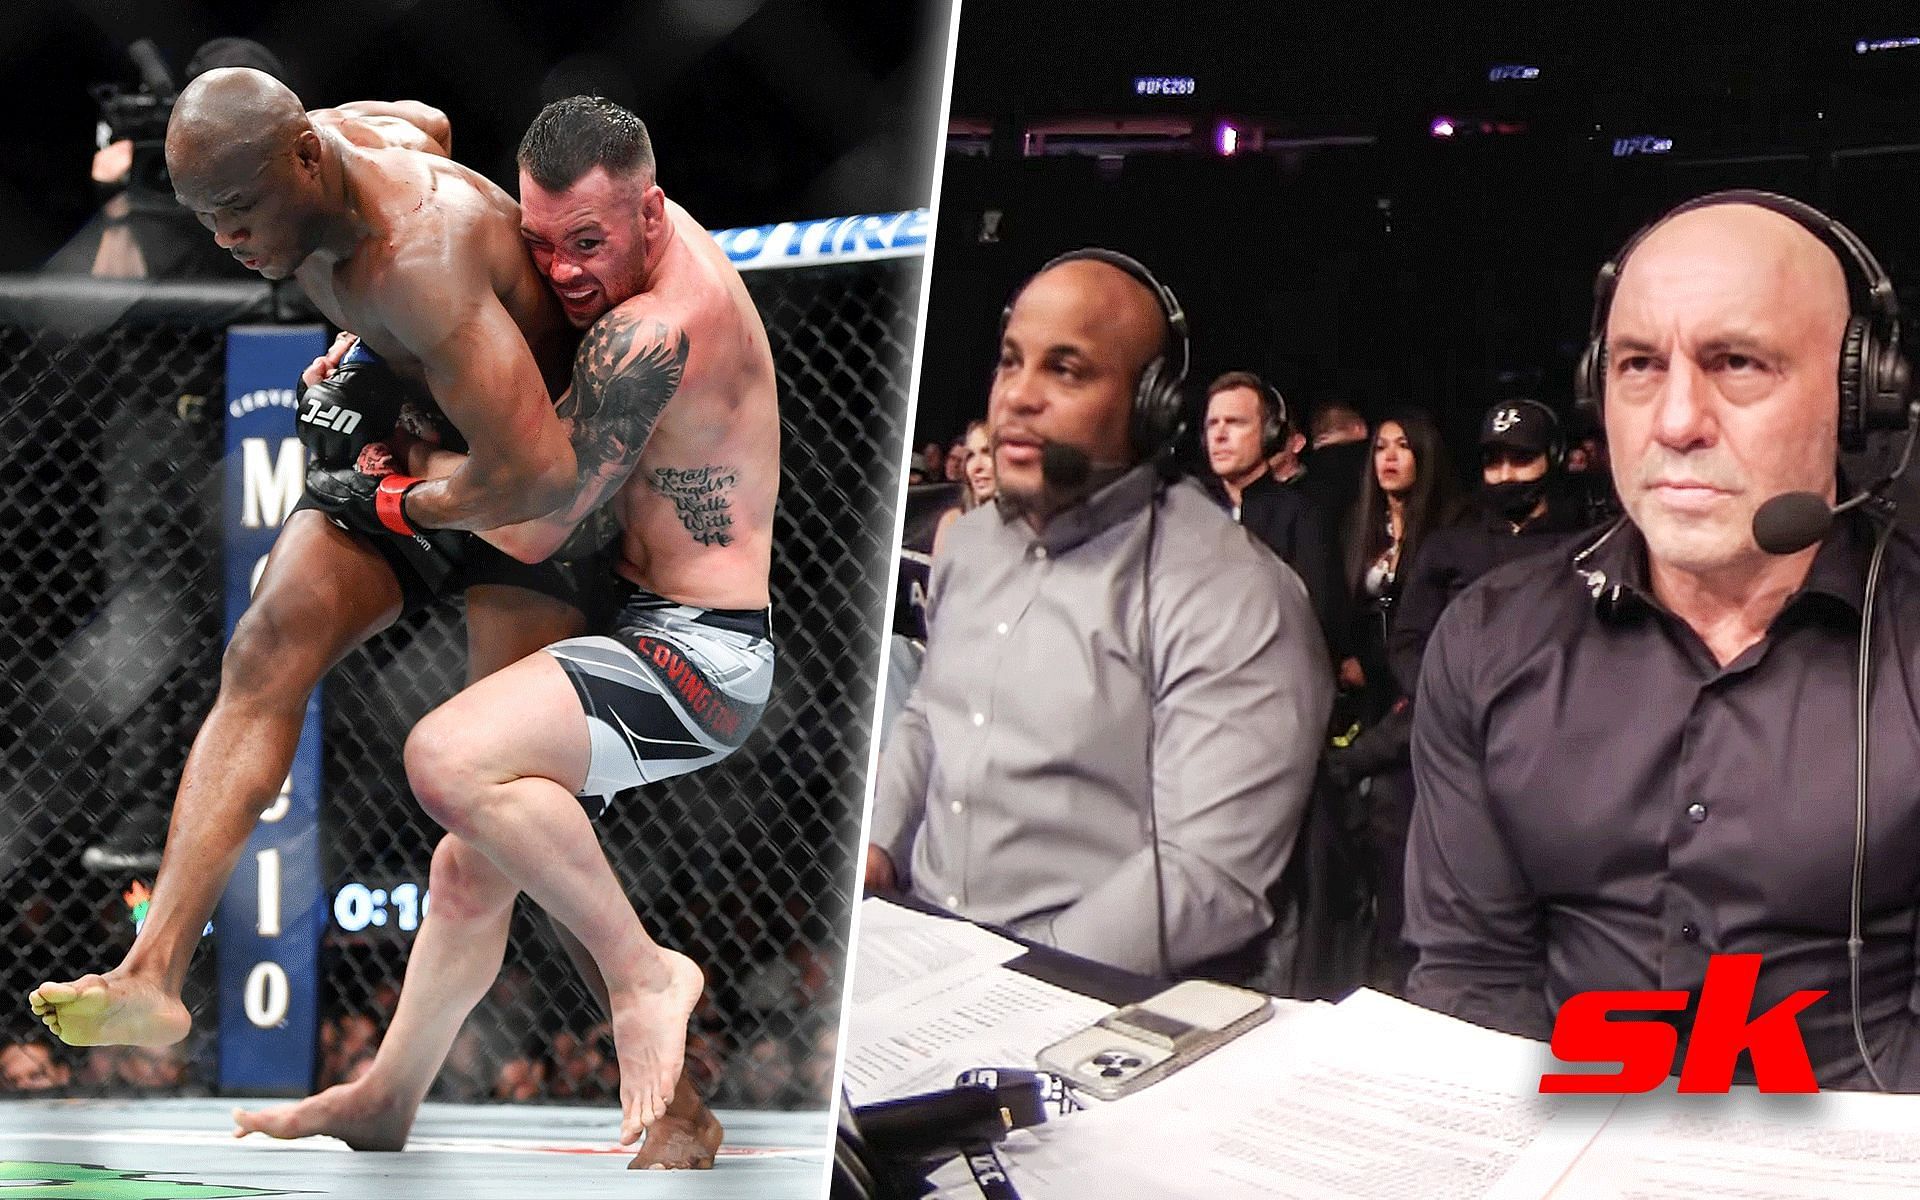 Colby Covington takes down Kamaru Usman (left) and Daniel Cormier and Joe Rogan (right). [Images courtesy: left image from Twitter @mmamania and right image from YouTube UFC]